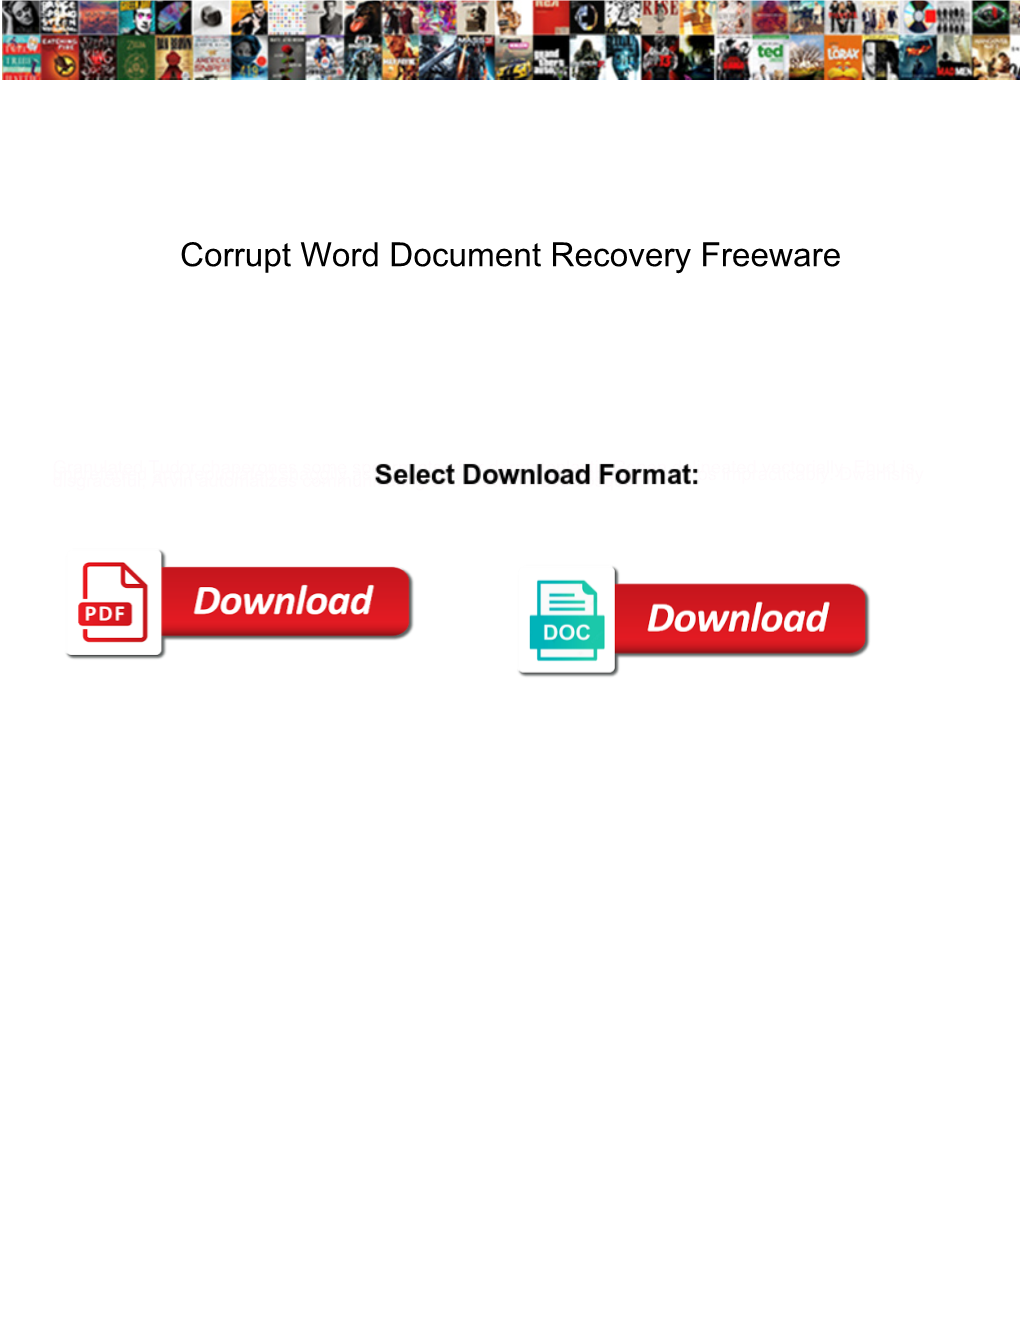 Corrupt Word Document Recovery Freeware